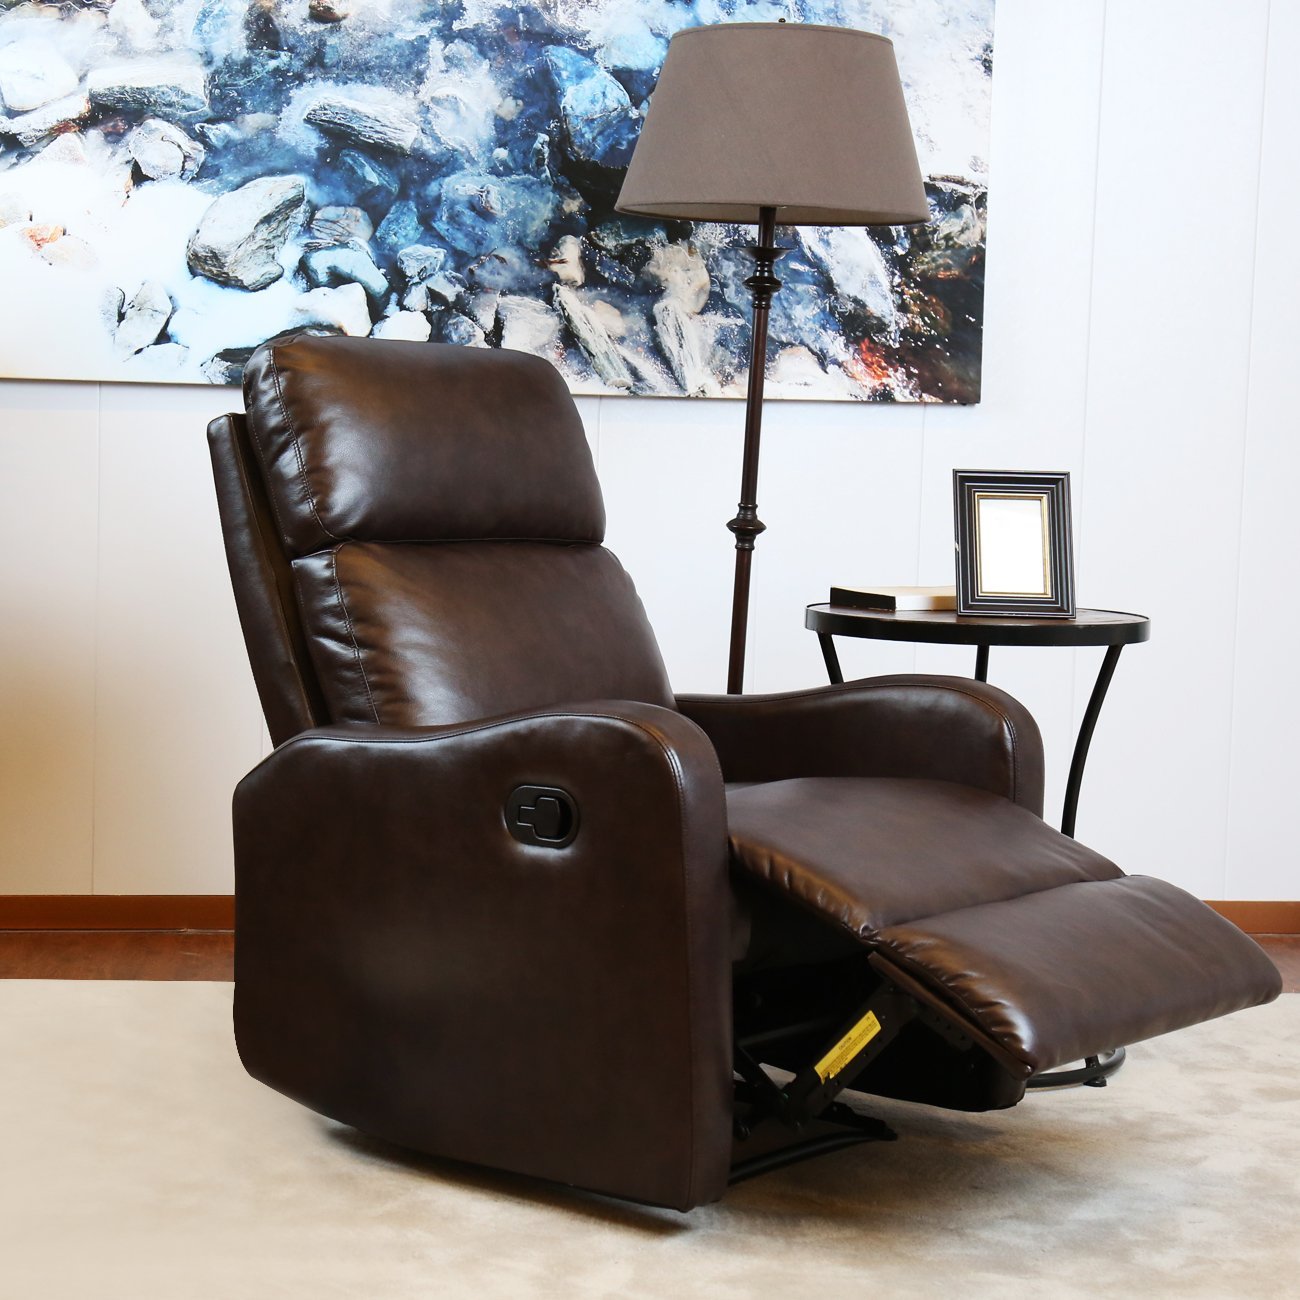 BONZY Contemporary Chocolate Leather Recliner Chair